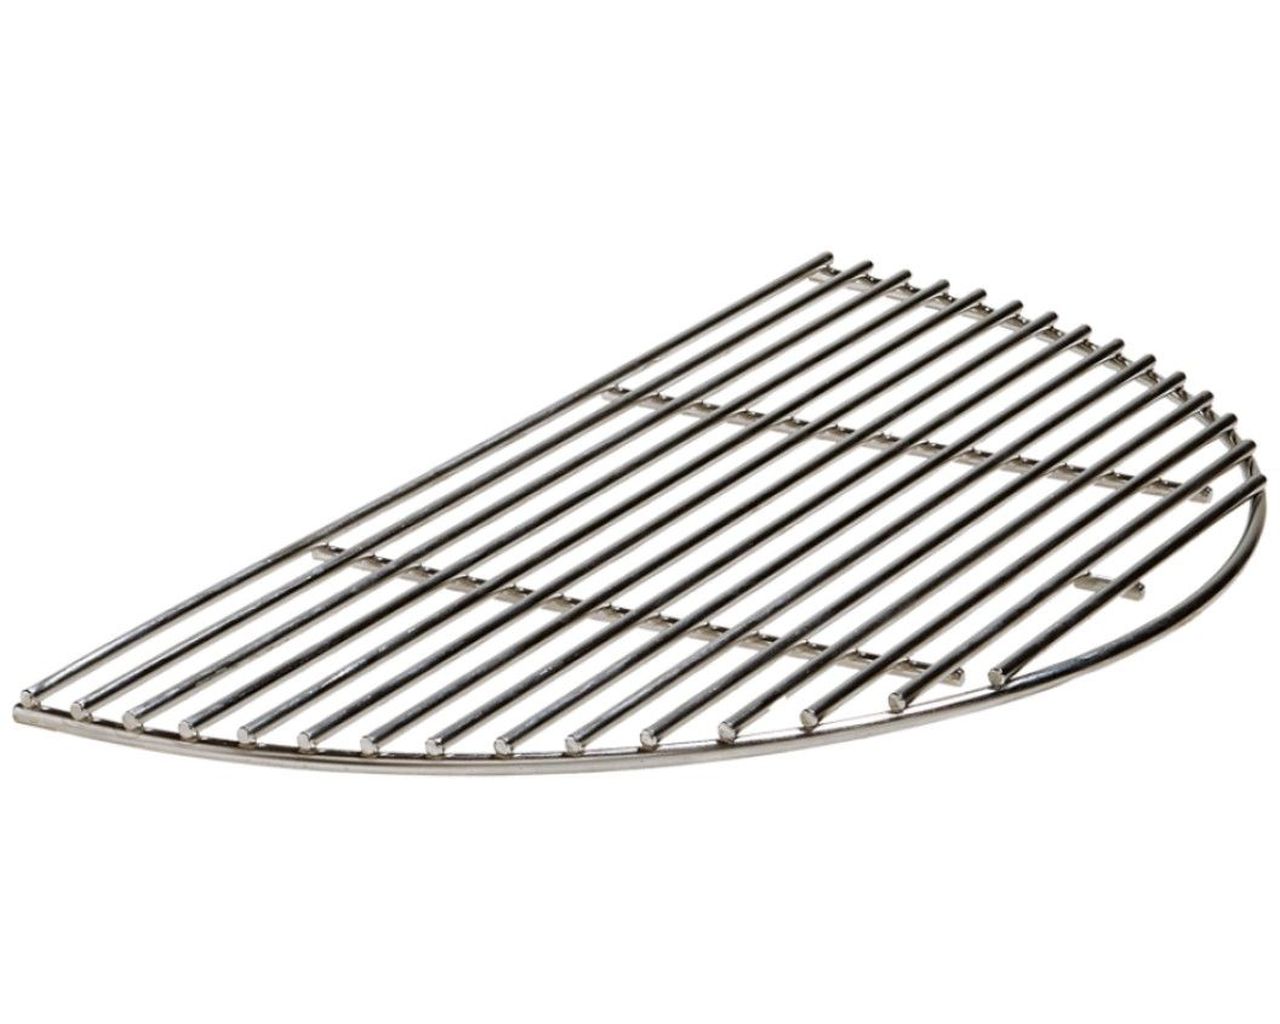 Kamado Classic One Half Moon SS Cooking Grate, , hi-res image number null